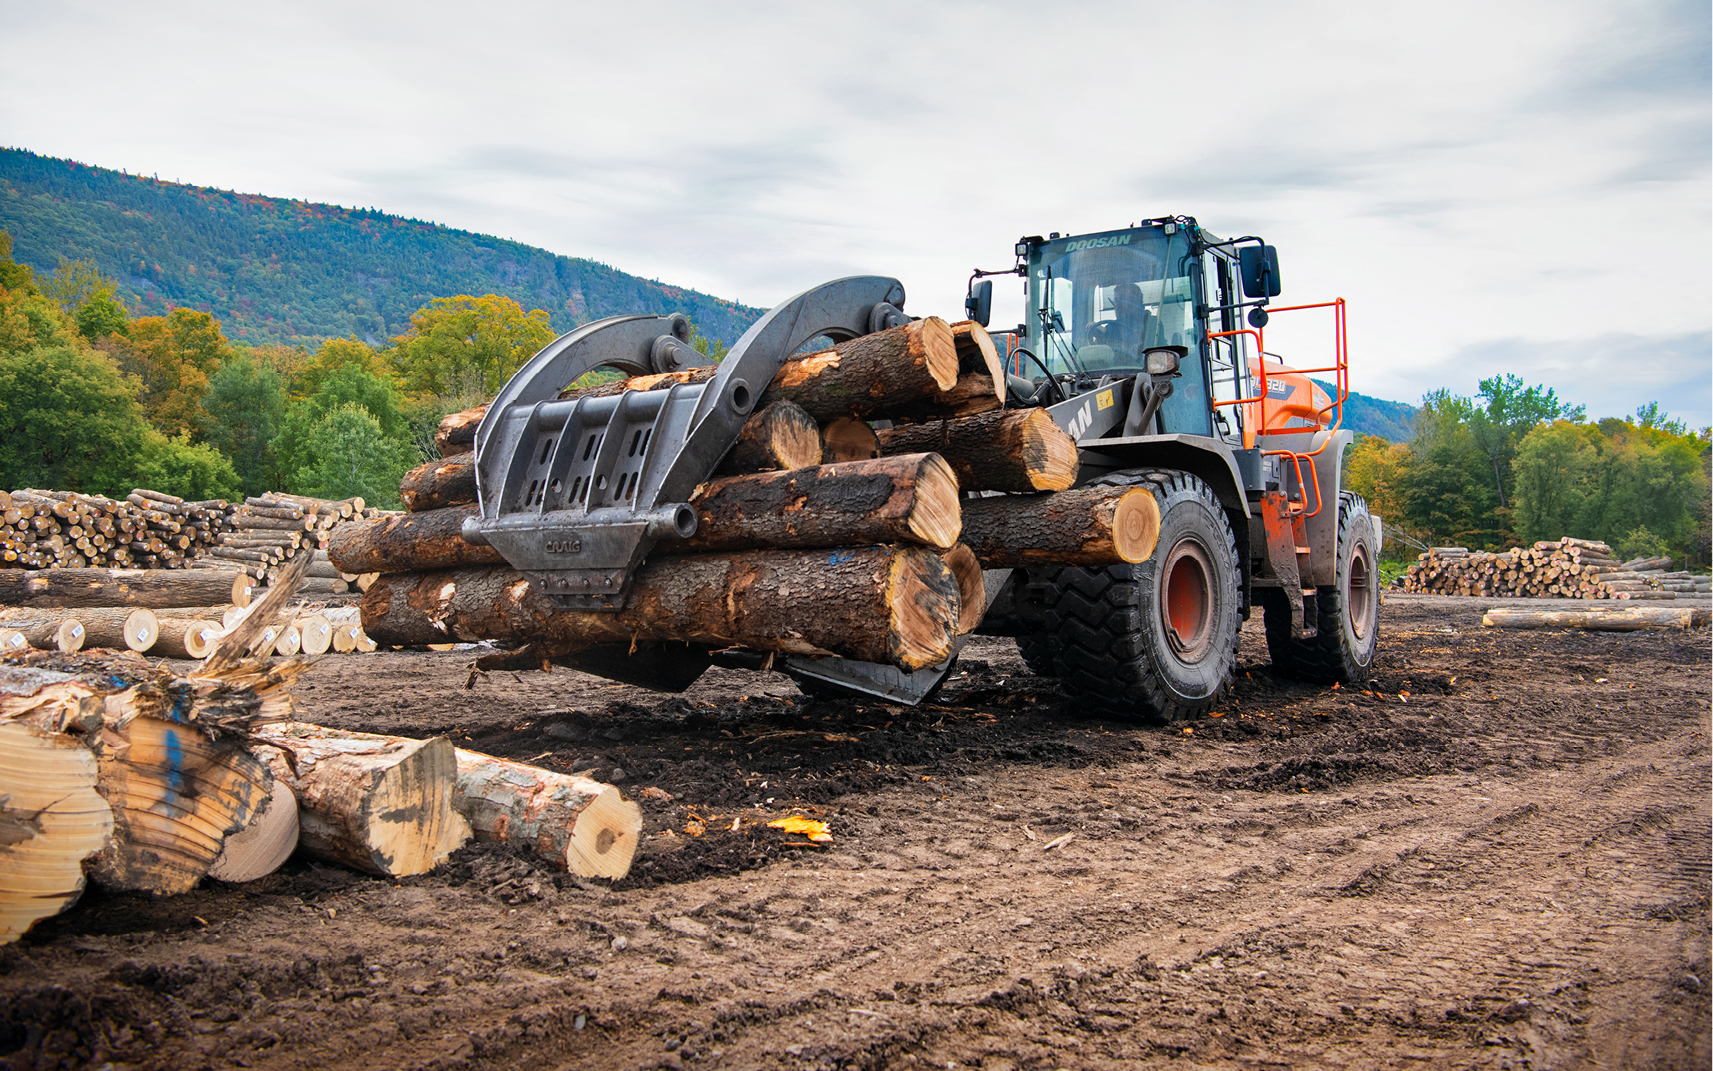 A Doosan DL320-7 wheel loader operator uses a log grapple to carry timber to the sawmill for processing.